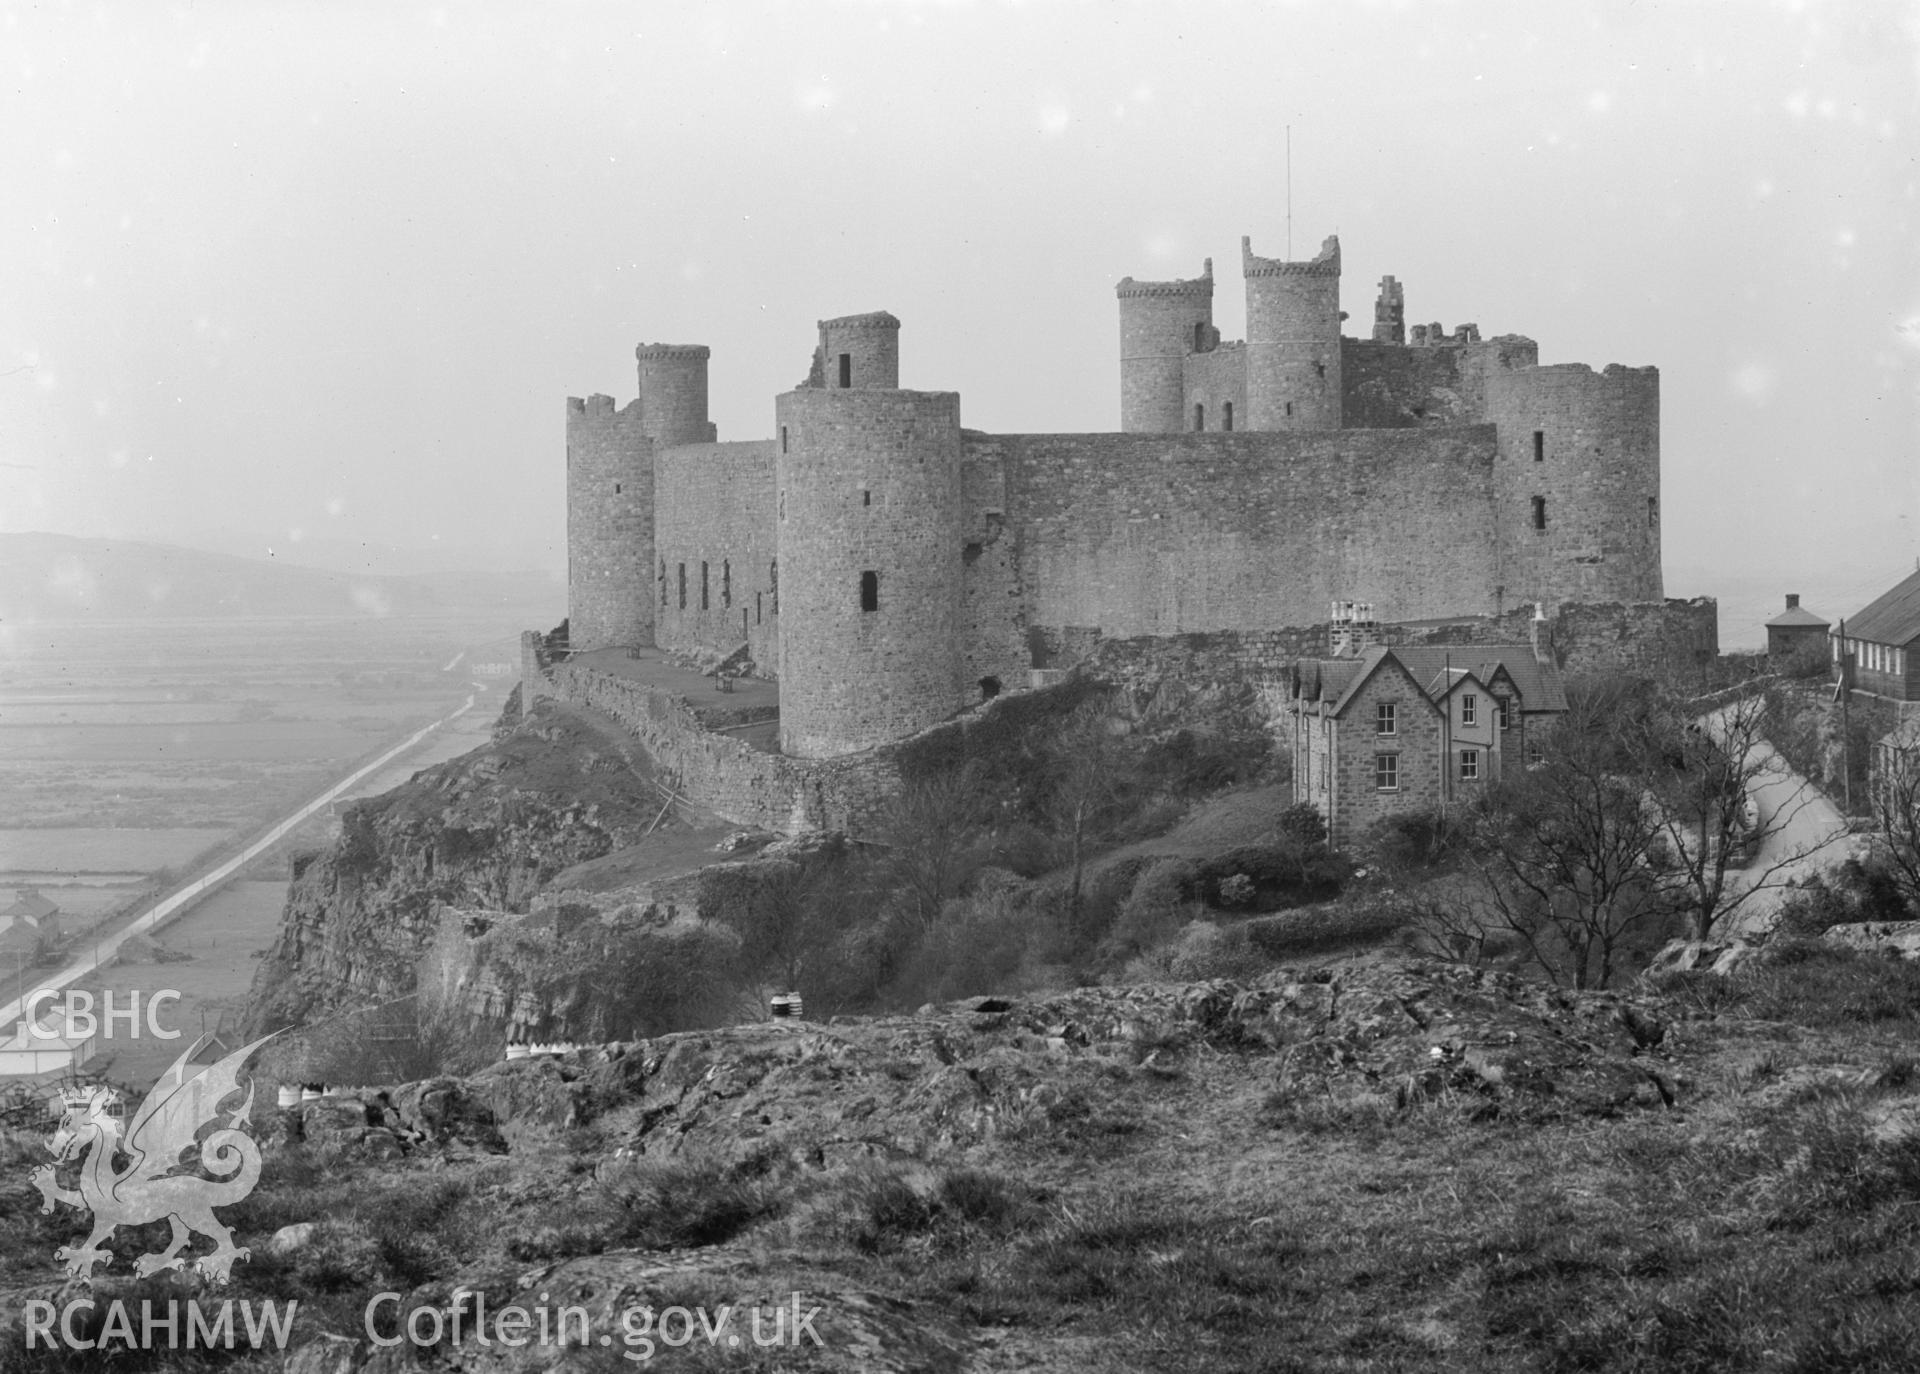 View of Harlech Castle from the south.